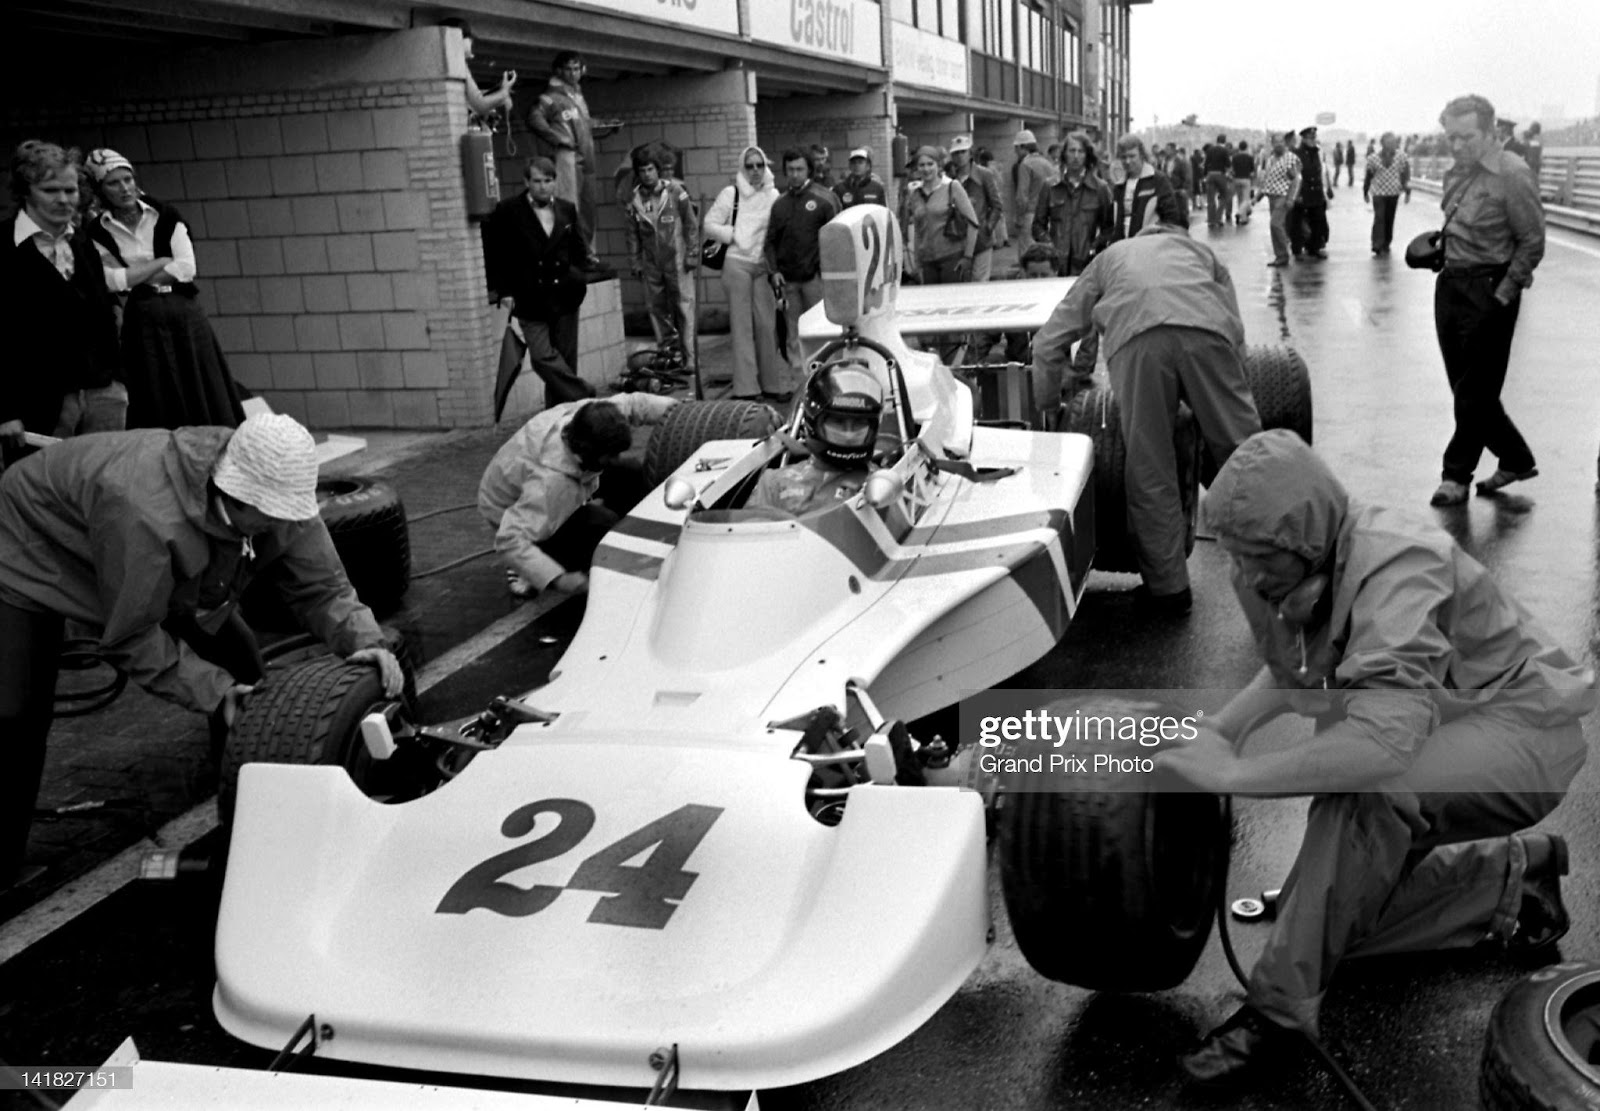 James Hunt makes an early pitstop driving the n. 24 Hesketh Racing Hesketh 308B Cosworth V8 DFV during the Dutch Grand Prix on 22nd June 1975 at the Circuit Park Zandvoort in Zandvoort, Netherlands. 